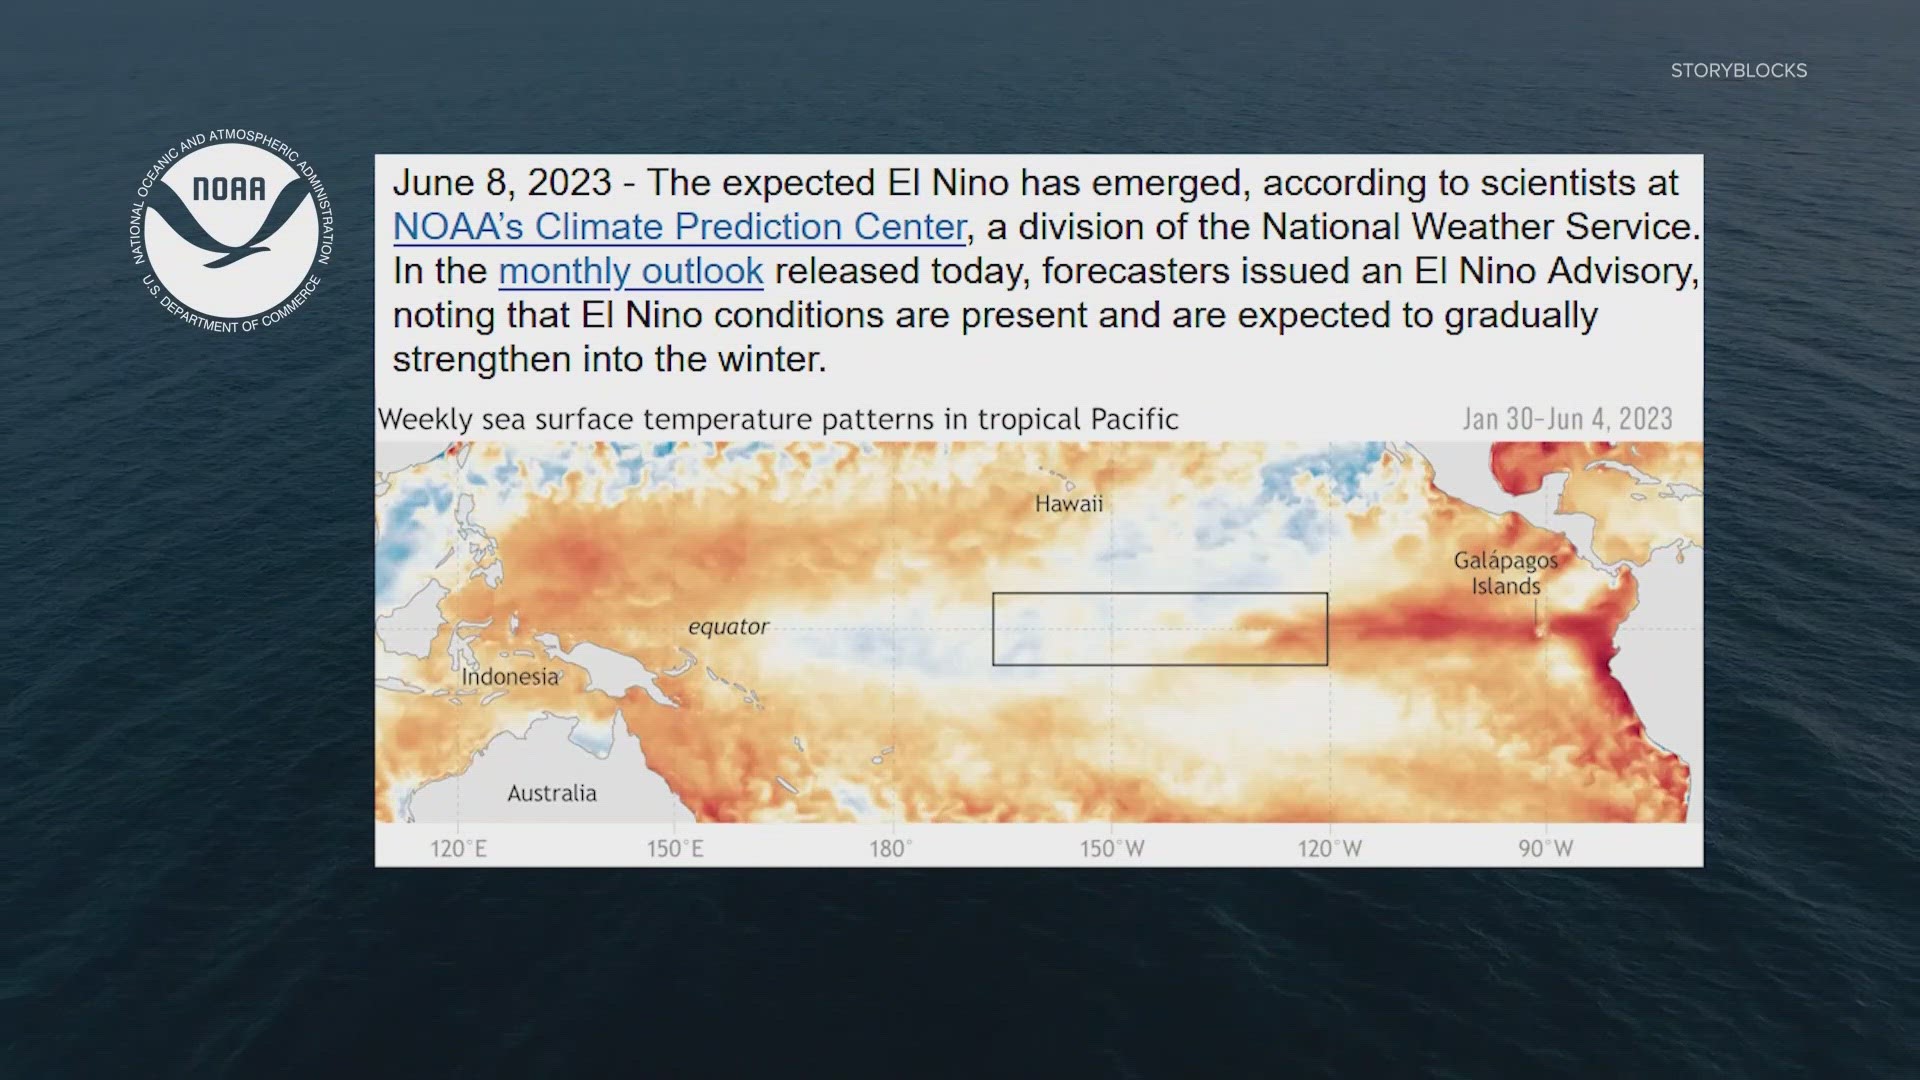 ASU researchers are tracking the incoming El Nino weather pattern and keeping an eye on how it will impact Arizona.